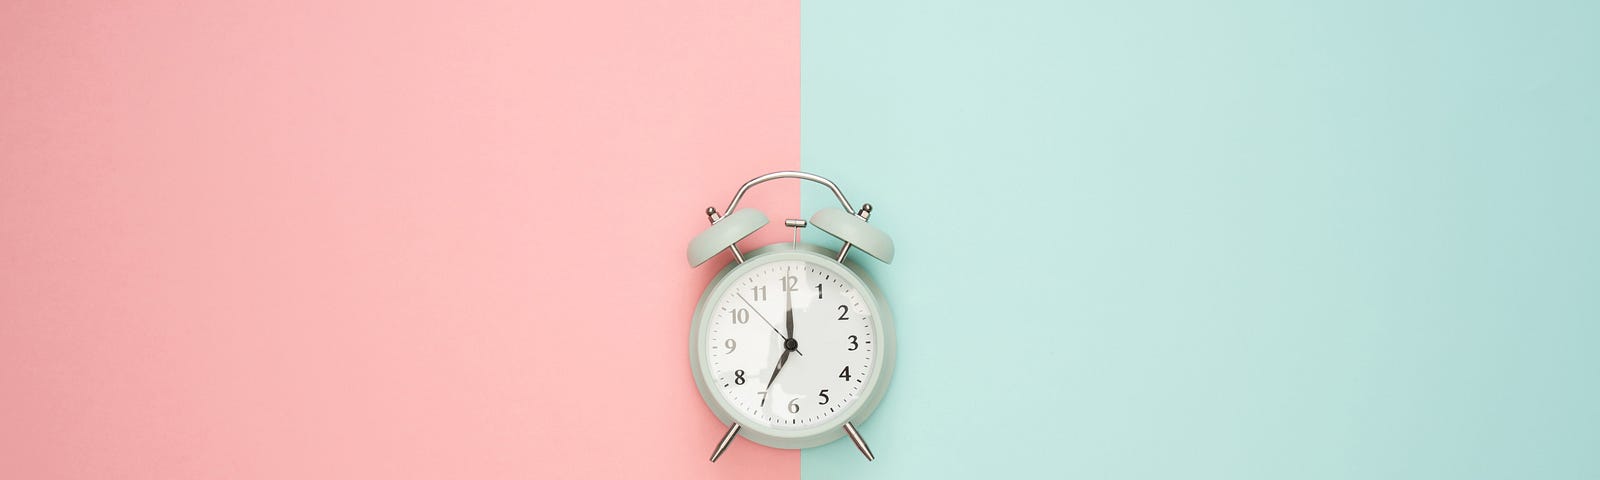 a clock on a pink and blue background